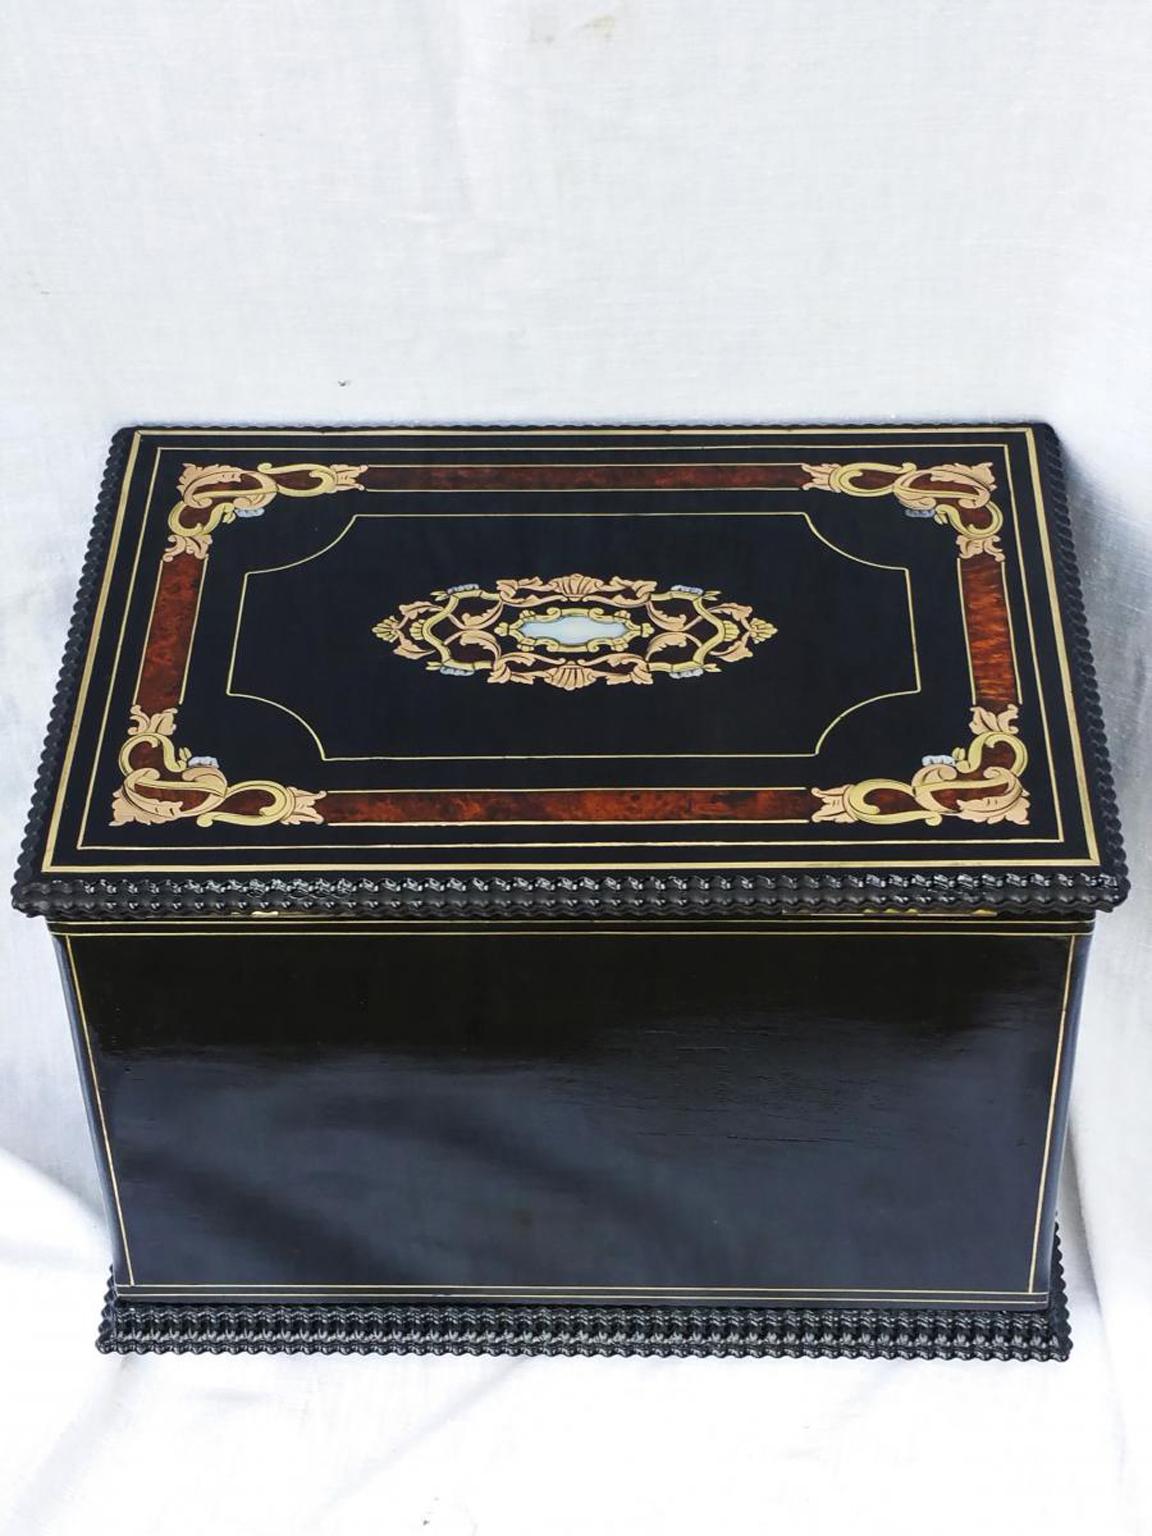 Jewel decorative box or sewing box, in Boulle style Marquetry in Ebony, Copper, Brass, Mother of Pearl and precious reddish Amaranthus wood.
It opens by a pressing button. The inside part is in burl and has a closed part covered in its original